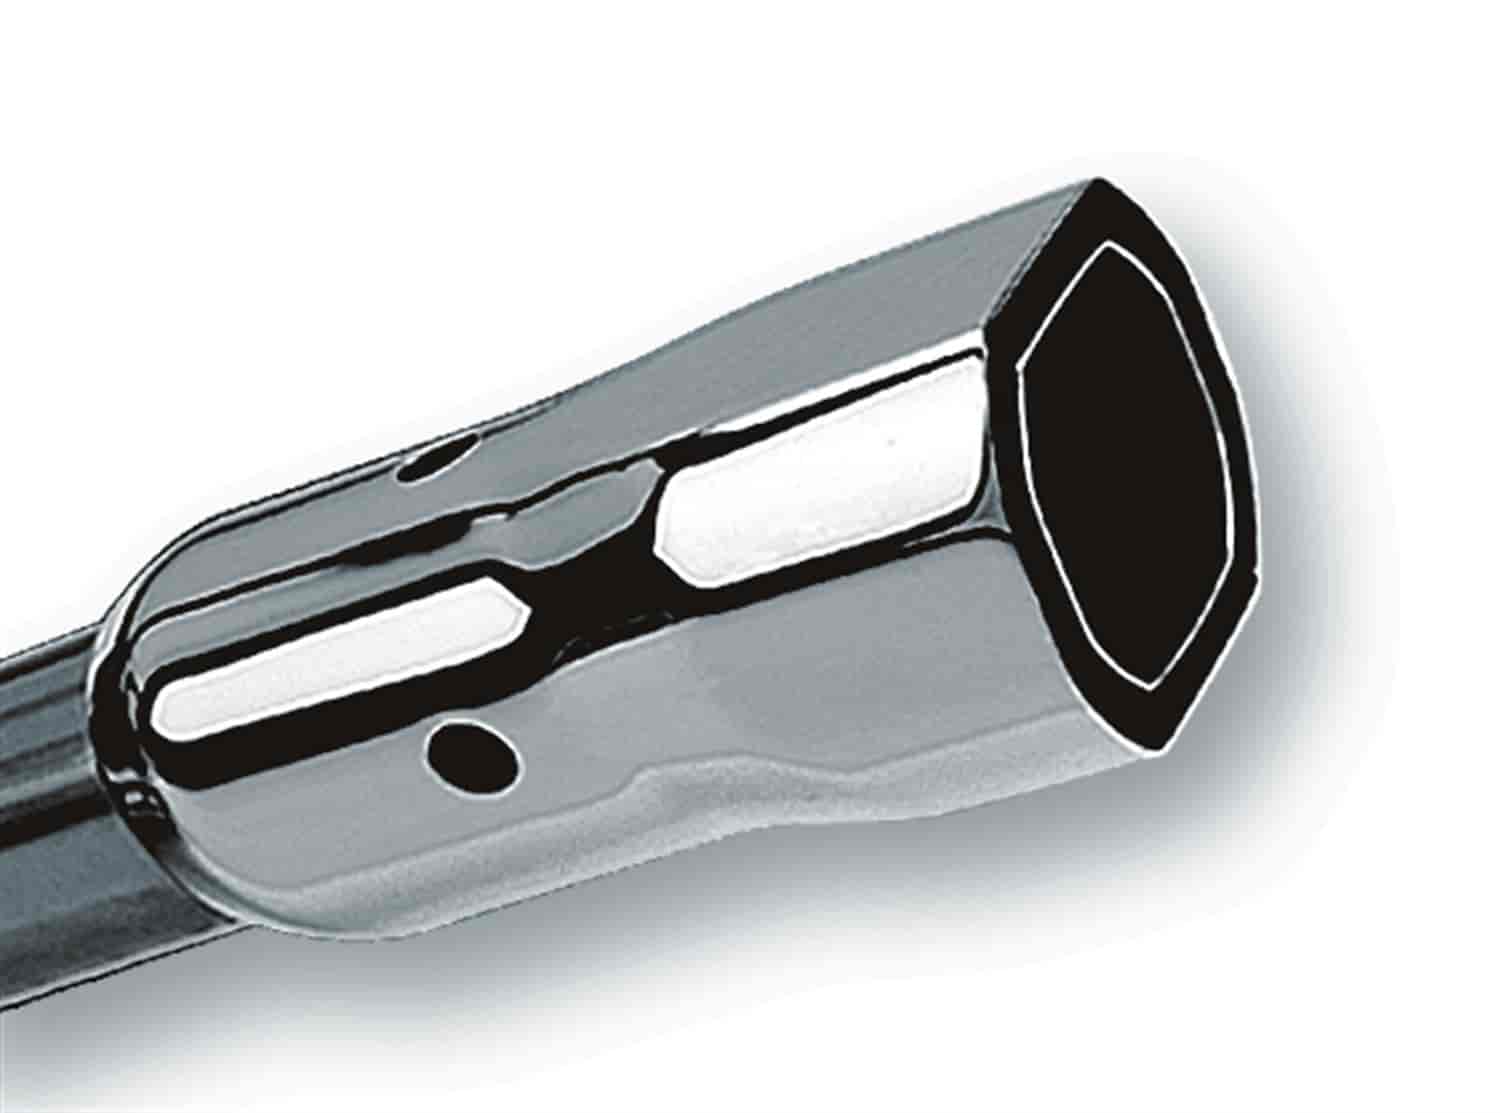 Stainless Steel Exhaust Tip Outlet Size: 3" x 3"